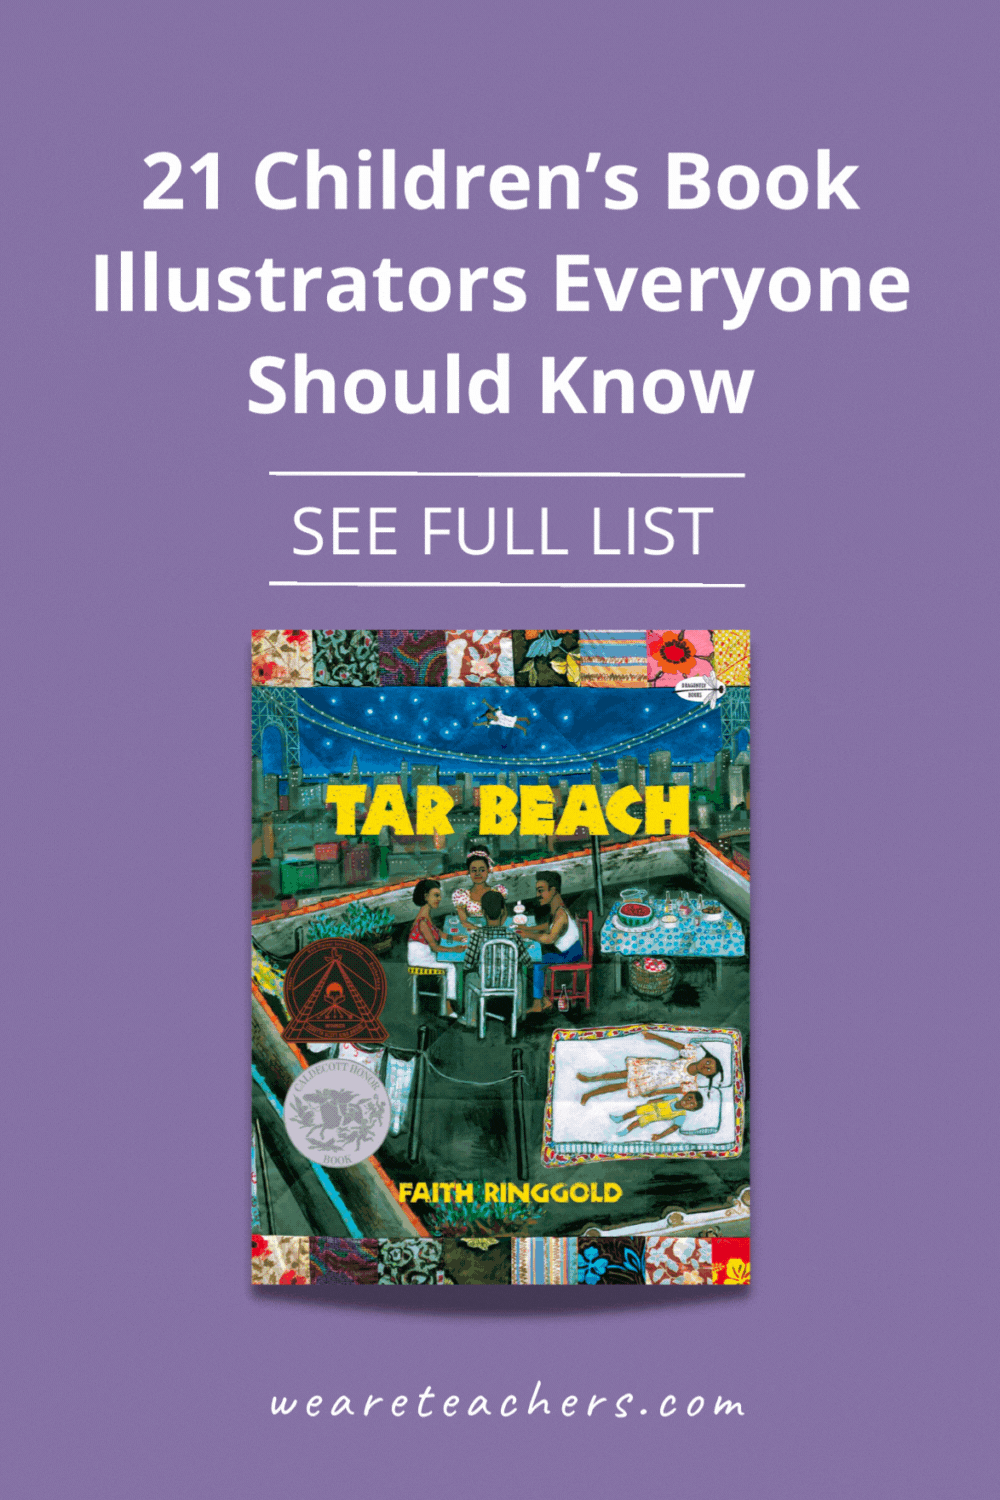 Ever wonder who illustrated your favorite children's book? Check out our list of 21 of the best children's book illustrators!